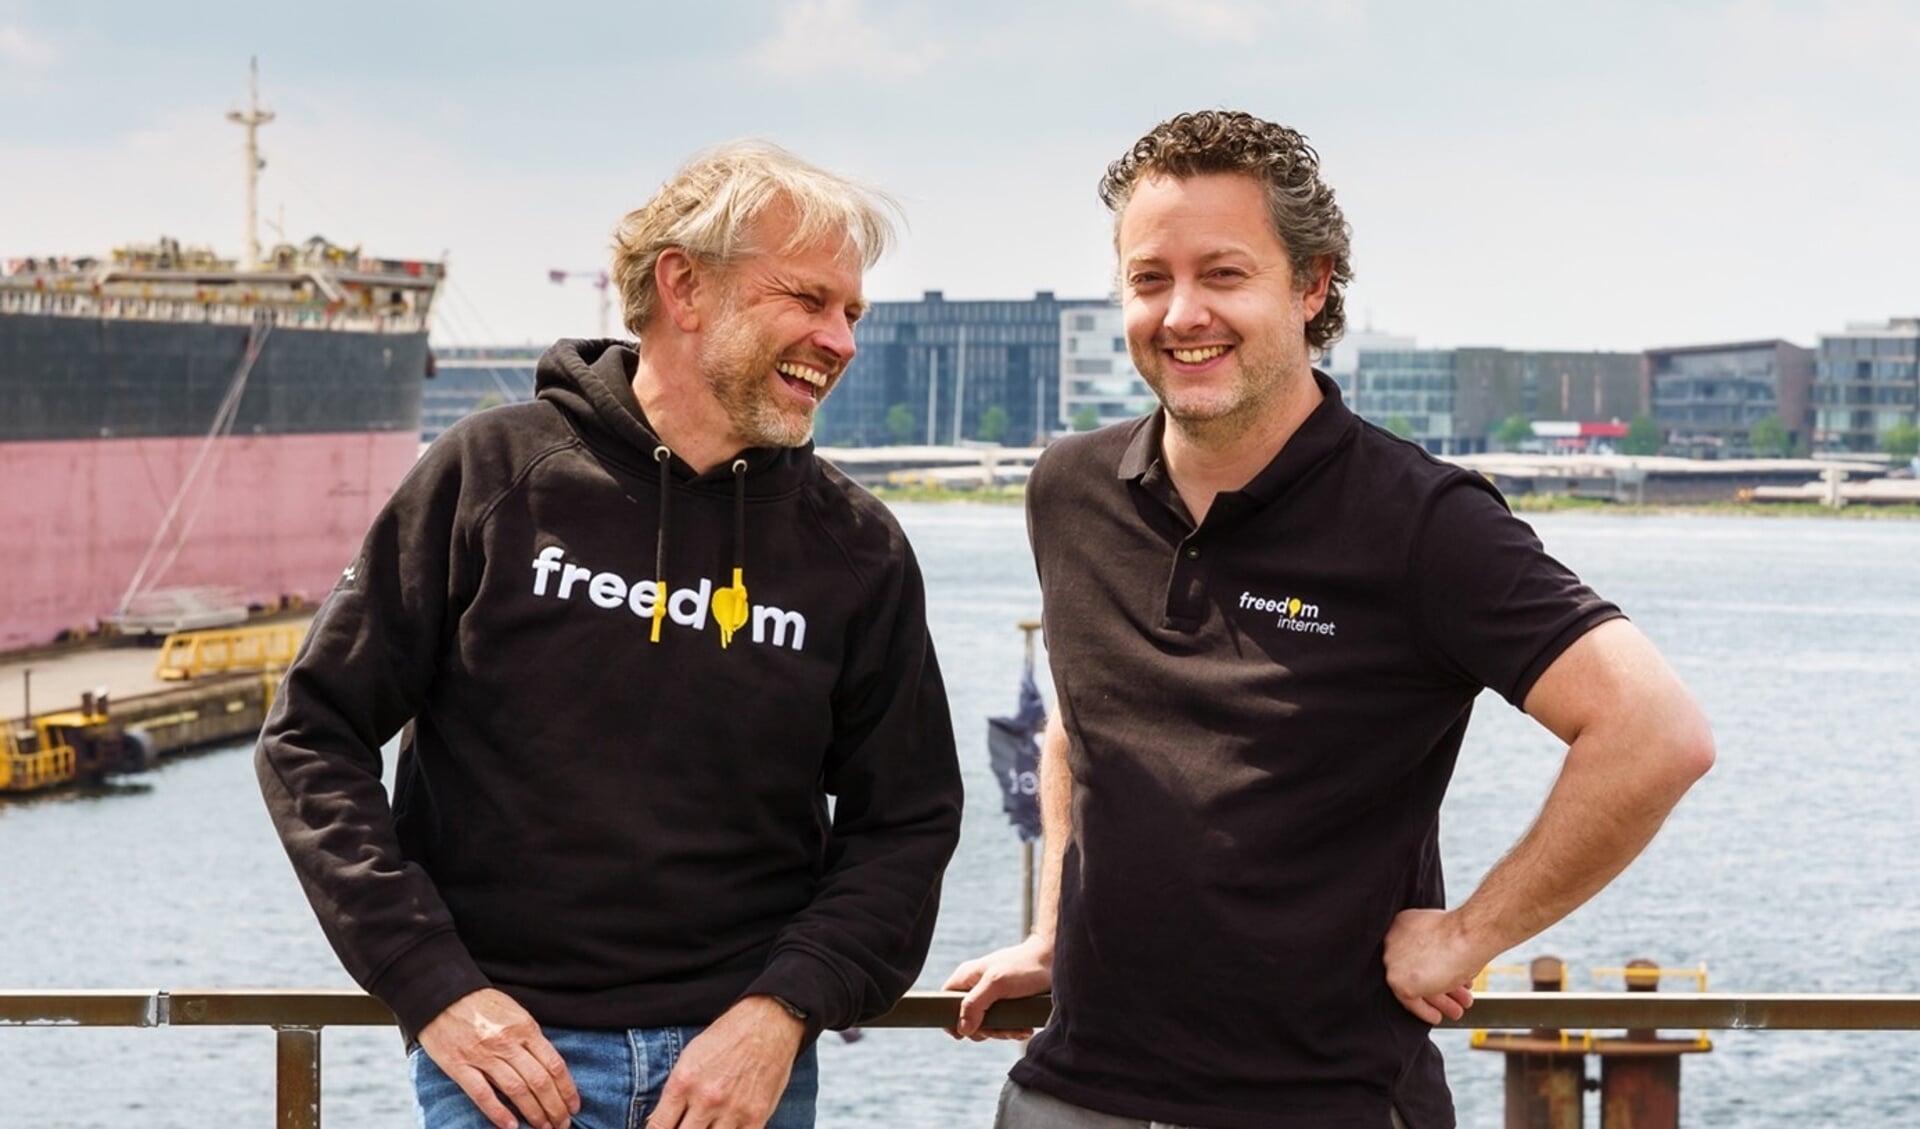 Anco Scholte ter Horst (CEO Freedom) en Twan (Manager Commercie Freedom).

